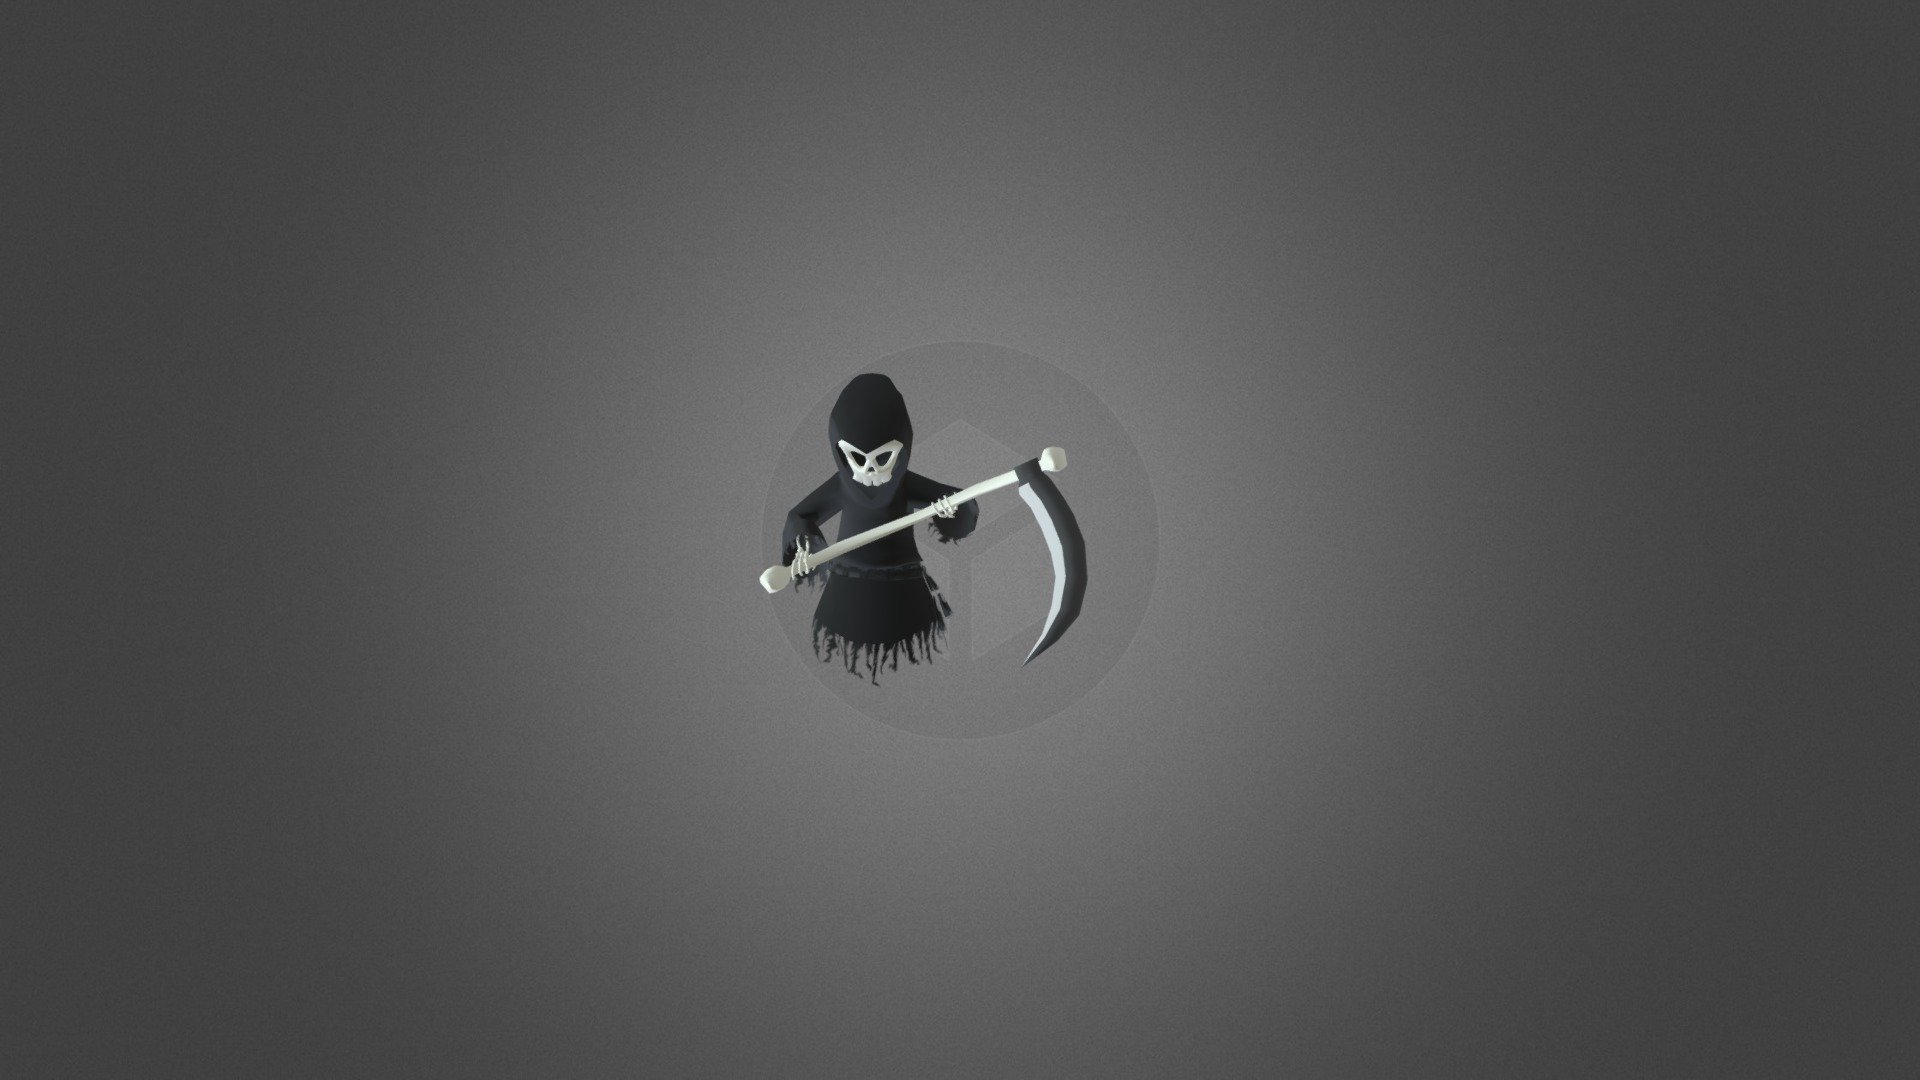 pls switch to frames(by clicking on the timer) to avoid some weird automatic generated poses

-

Model and Rig made by gustavobelo_

Animations of Morte Jr. and his scythe by me - Slash attack - animation - 3D model by Tooupi 3d model